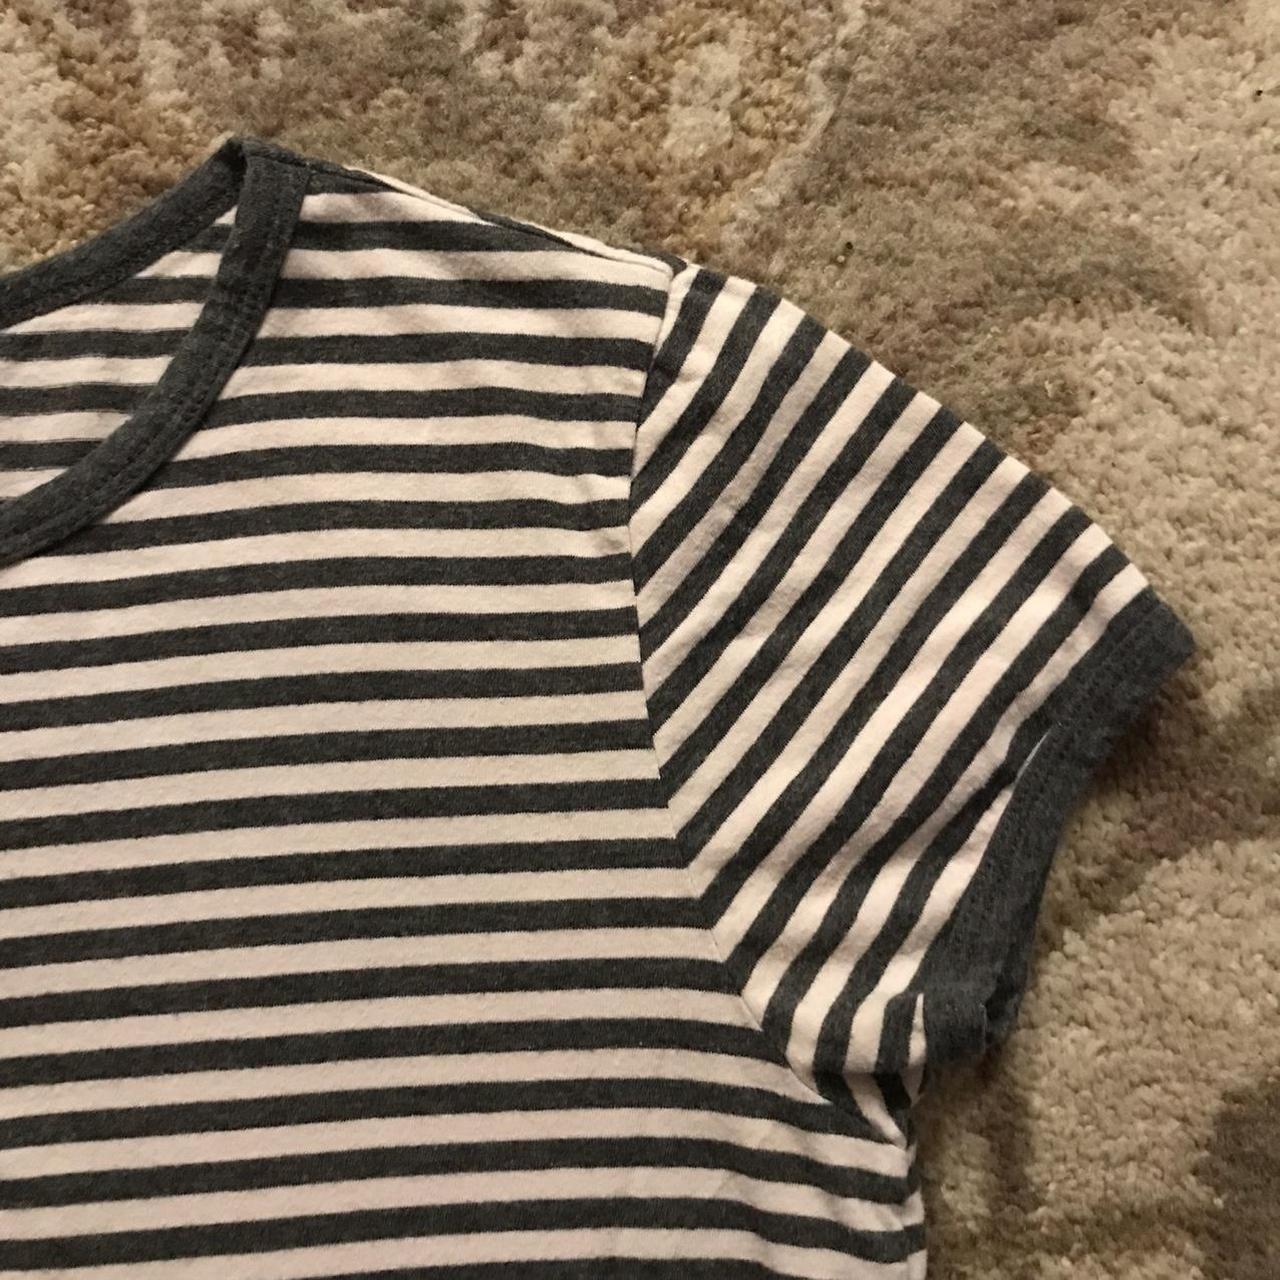 Product Image 3 - Vintage Aesthetic Striped Top
Brand New